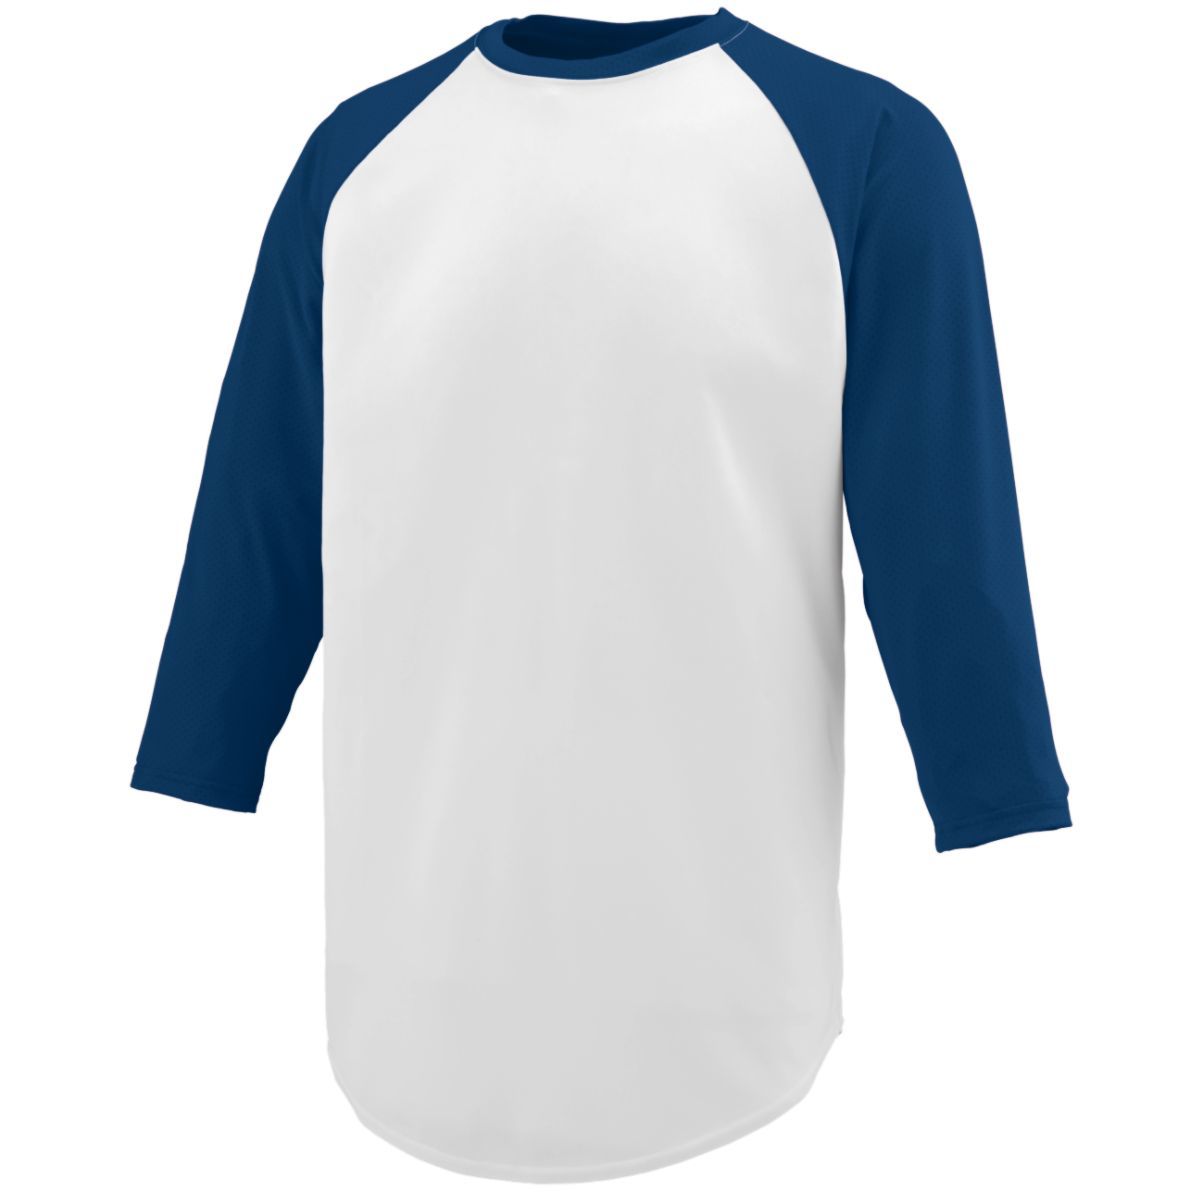 Augusta Sportswear Nova Jersey in White/Navy  -Part of the Adult, Adult-Jersey, Augusta-Products, Baseball, Shirts, All-Sports, All-Sports-1 product lines at KanaleyCreations.com